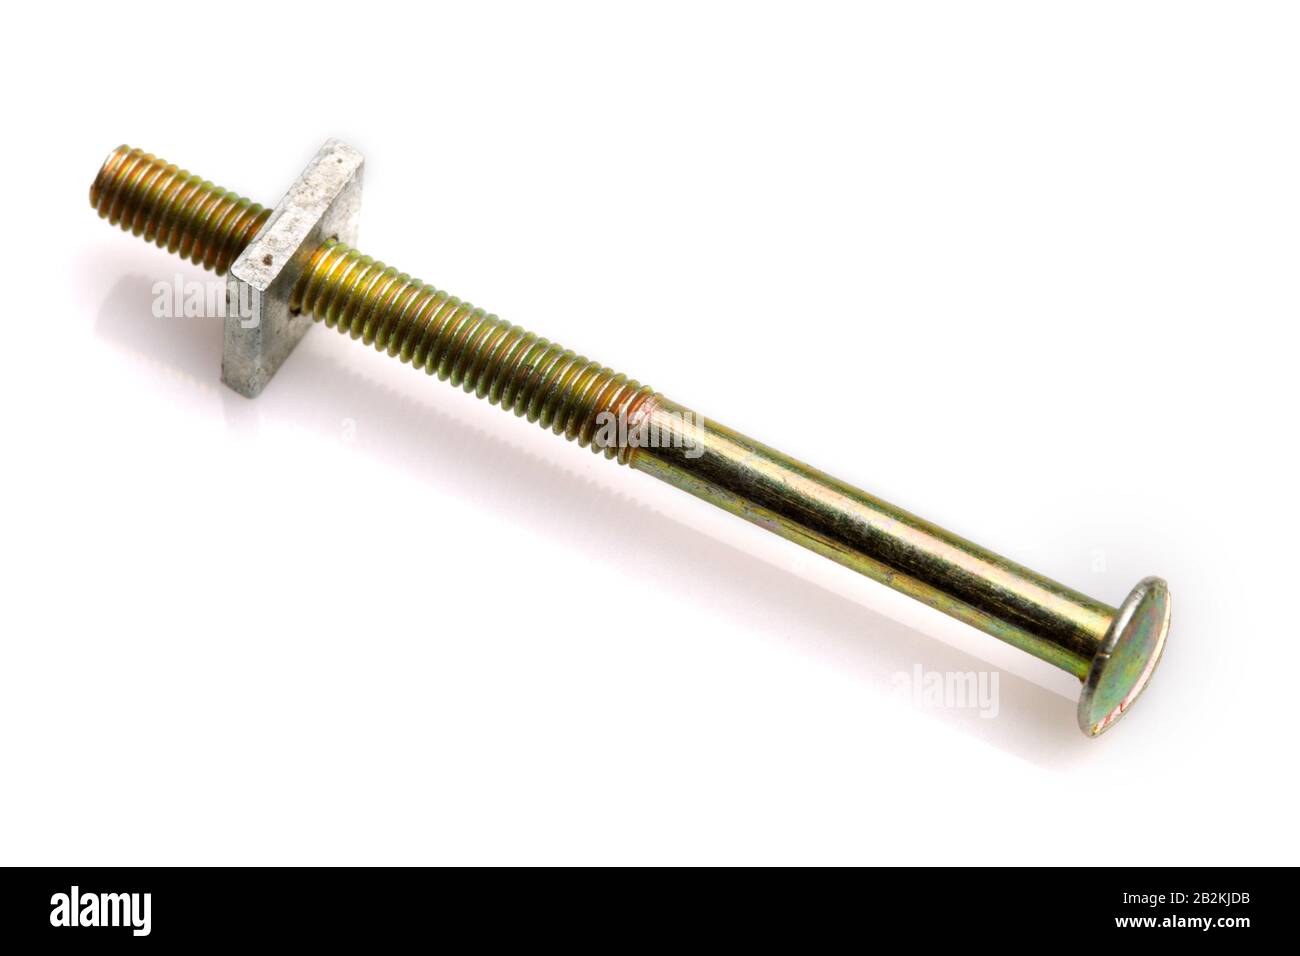 Screw And Nut With Small Step Thread Mostly Used In Electrical Machines Studio Isolated Shot Stock Photo